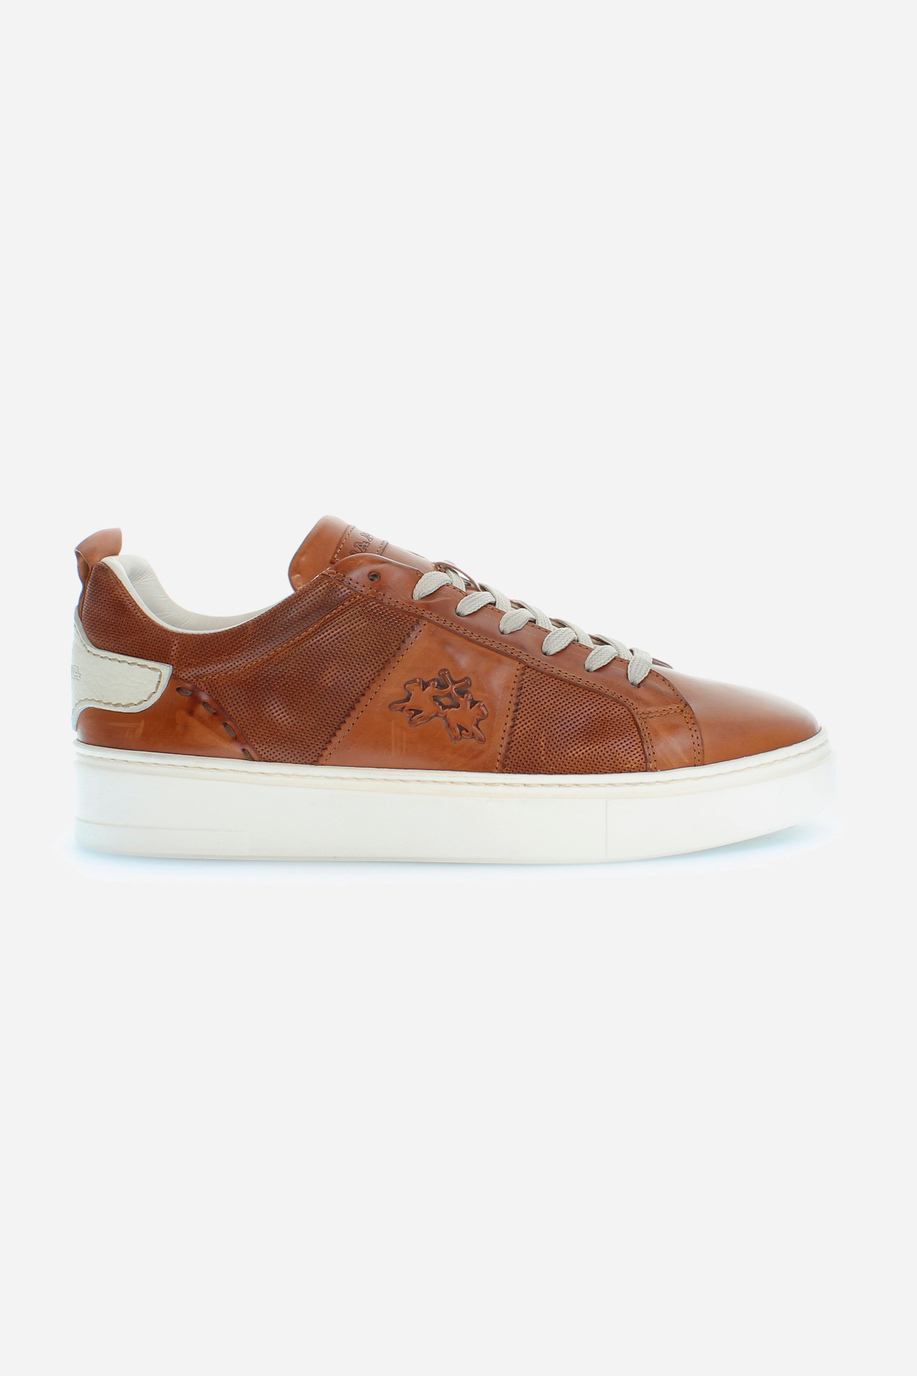 Men's leather trainers with contrasting inserts - Footwear | La Martina - Official Online Shop